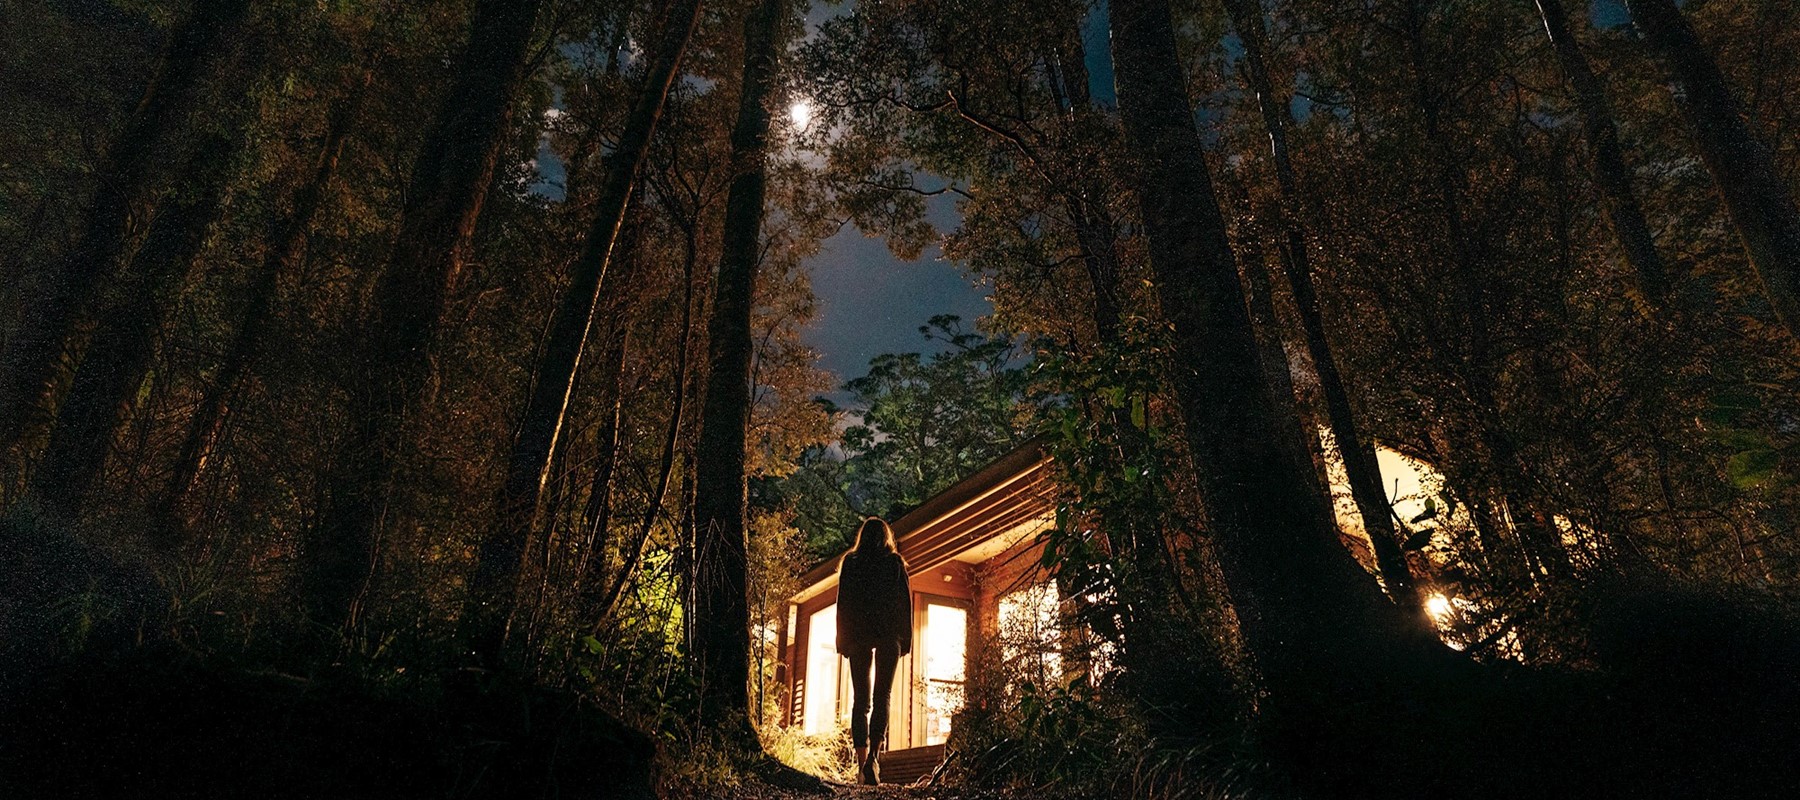 Lady standing in the moonlight under the stars between two tall tress, with Milford Sound Rainforest Facilities in the foreground.